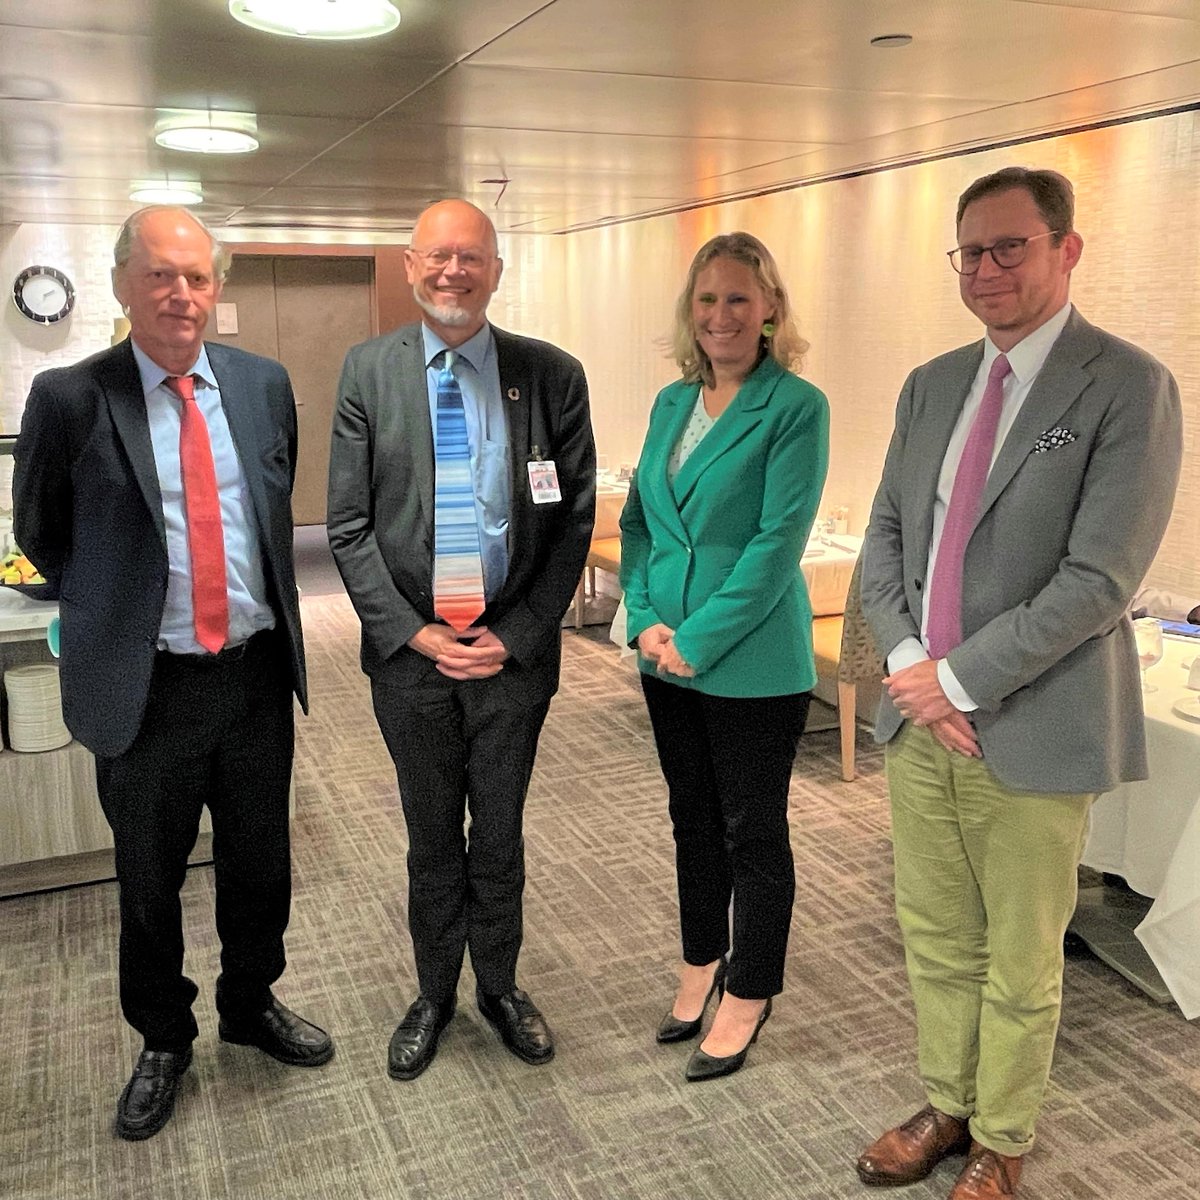 Prof. @JPvanYpersele had a constructive meeting w/ Nathalie Franken MIGA Director & Juergen Voegele VP Sustainable Devt @Worldbank. Topics included state of climate finance, synergies b/w @UN’s SDG’s & fighting climate change, partnership opps World Bank-IPCC. #IPCCvoiceOfClimate